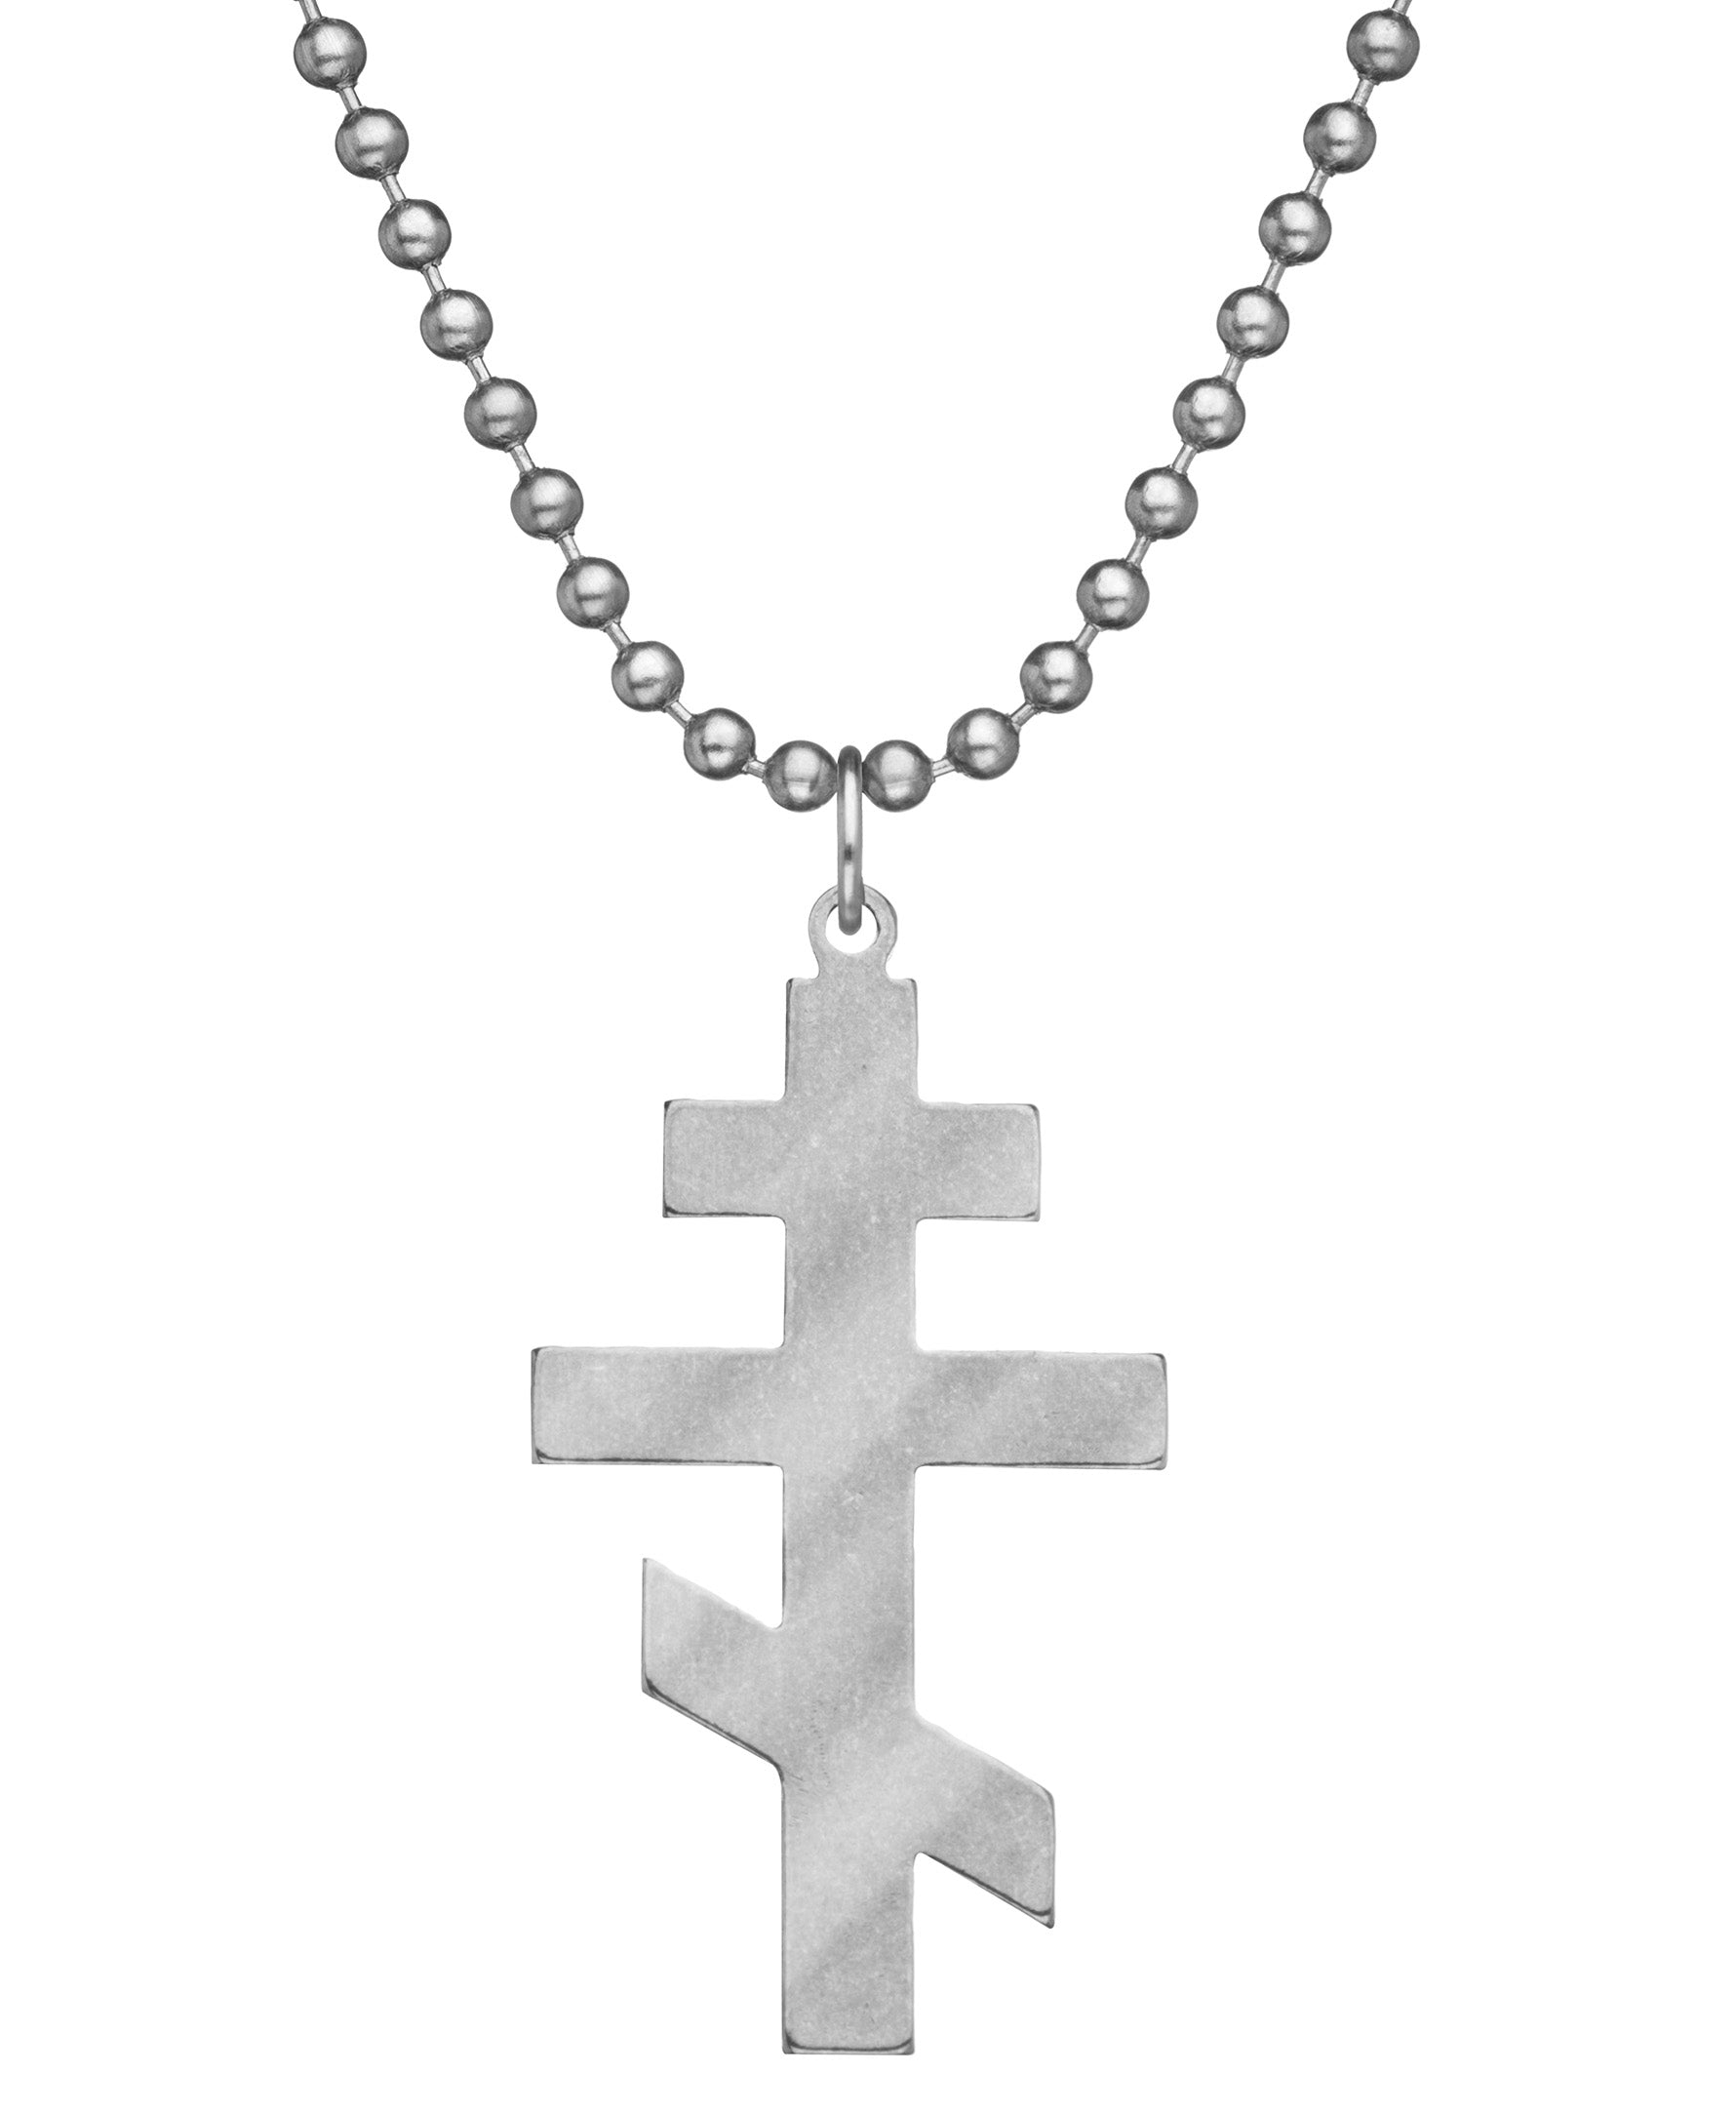 Genuine U.S. Military Issue Orthodox Cross Necklace with Dog Tag Chain